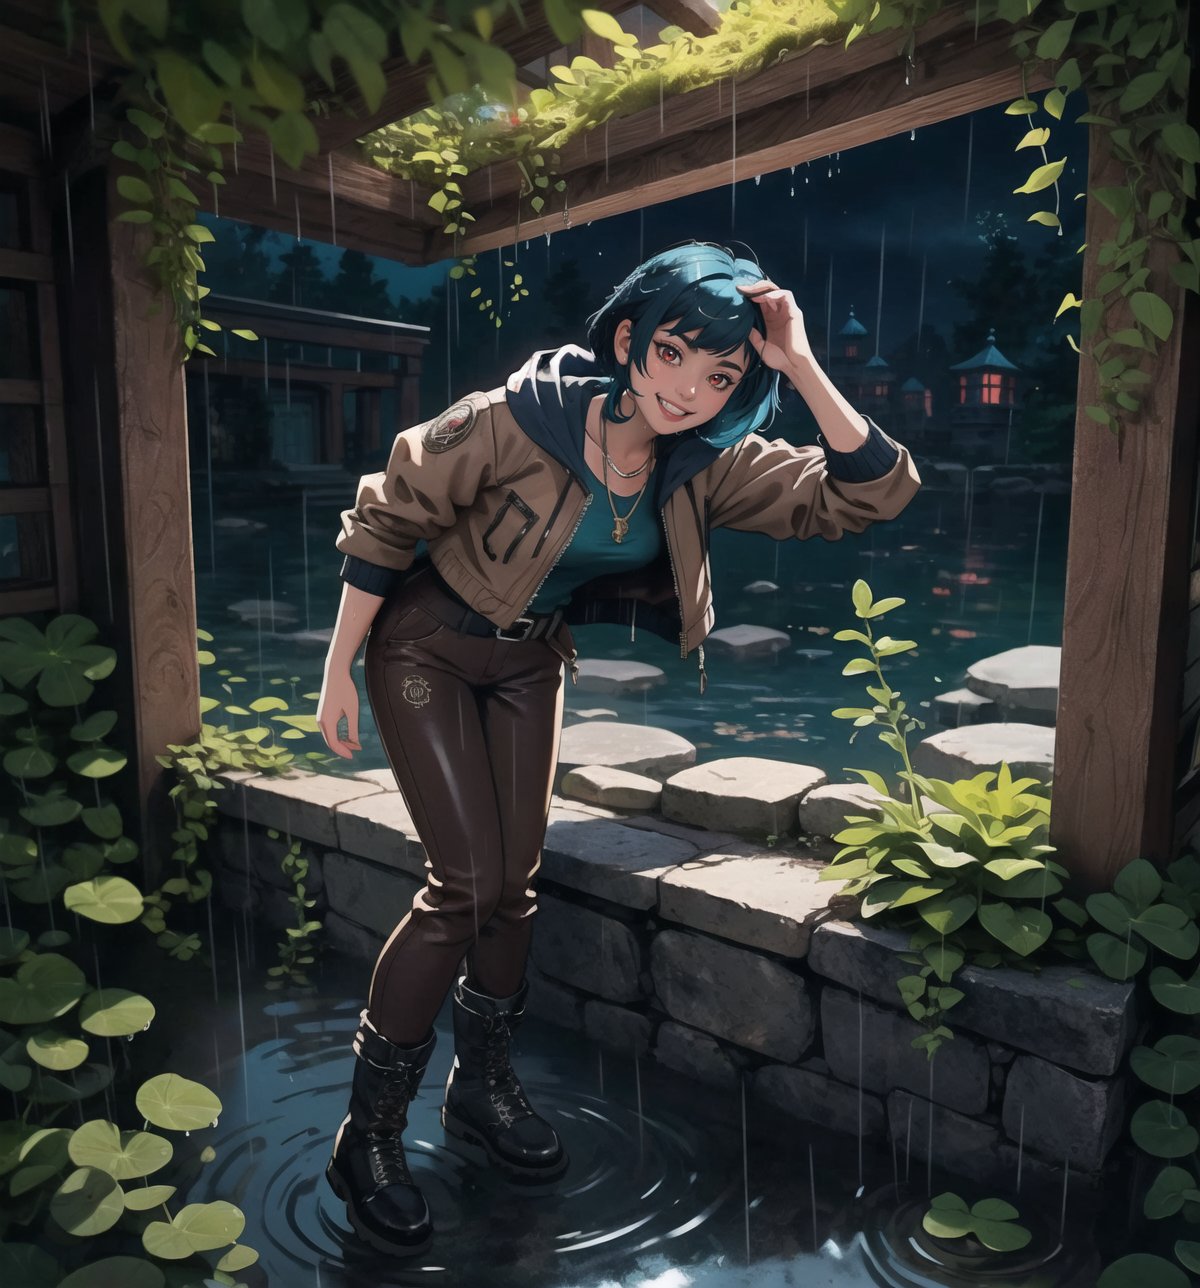 An ultra-detailed 4K masterpiece, combining fantasy and adventure styles, rendered in high resolution with sharp details. | A 23-year-old adventurer, dressed in a brown leather suit, explores a mysterious water temple during a night of torrential rain. Her outfit consists of a hooded jacket, tight pants, high boots, and a belt with multiple compartments to store her belongings. Her short, unkempt ((blue hair)) is wet from the rain, giving her a wild, disheveled look. Her red eyes shine with determination and curiosity, while ((she looks and smiles at the viewer, showing her white teeth)). | The image highlights the adventurer's athletic figure and the humid and gloomy environment of the water temple. The temple's ancient, rocky structures are covered in mosses and algae, suggesting that it has been submerged for a long time. Heavy rain hits the surrounding rocks, creating an immersive and realistic sound effect. The dim and mysterious lighting is created by some spotlights installed on the walls, highlighting the rough textures of the rocks and creating dramatic shadows. | Dark, cinematic lighting effects create a tense and exciting atmosphere, while detailed textures on the rocks, moss and leather suit add realism to the image. | A thrilling and suspenseful scene of a young adventurer exploring a mysterious water temple during a night of torrential rain, combining the styles of fantasy and adventure. | (((The image reveals a full-body shot as the woman assumes a sensual pose, engagingly leaning against a structure within the scene in an exciting manner. She takes on a sensual pose as she interacts, boldly leaning on a structure, leaning back and boldly throwing herself onto the structure, reclining back in an exhilarating way.))). | ((((full-body shot)))), ((perfect pose)), ((perfect arms):1.2), ((perfect limbs, perfect fingers, better hands, perfect hands, hands)), ((perfect legs, perfect feet):1.2), ((perfect design)), ((perfect composition)), ((very detailed scene, very detailed background, perfect layout, correct imperfections)), ((Enhance, Ultra details)), ((better_hands)), ((More Detail)),